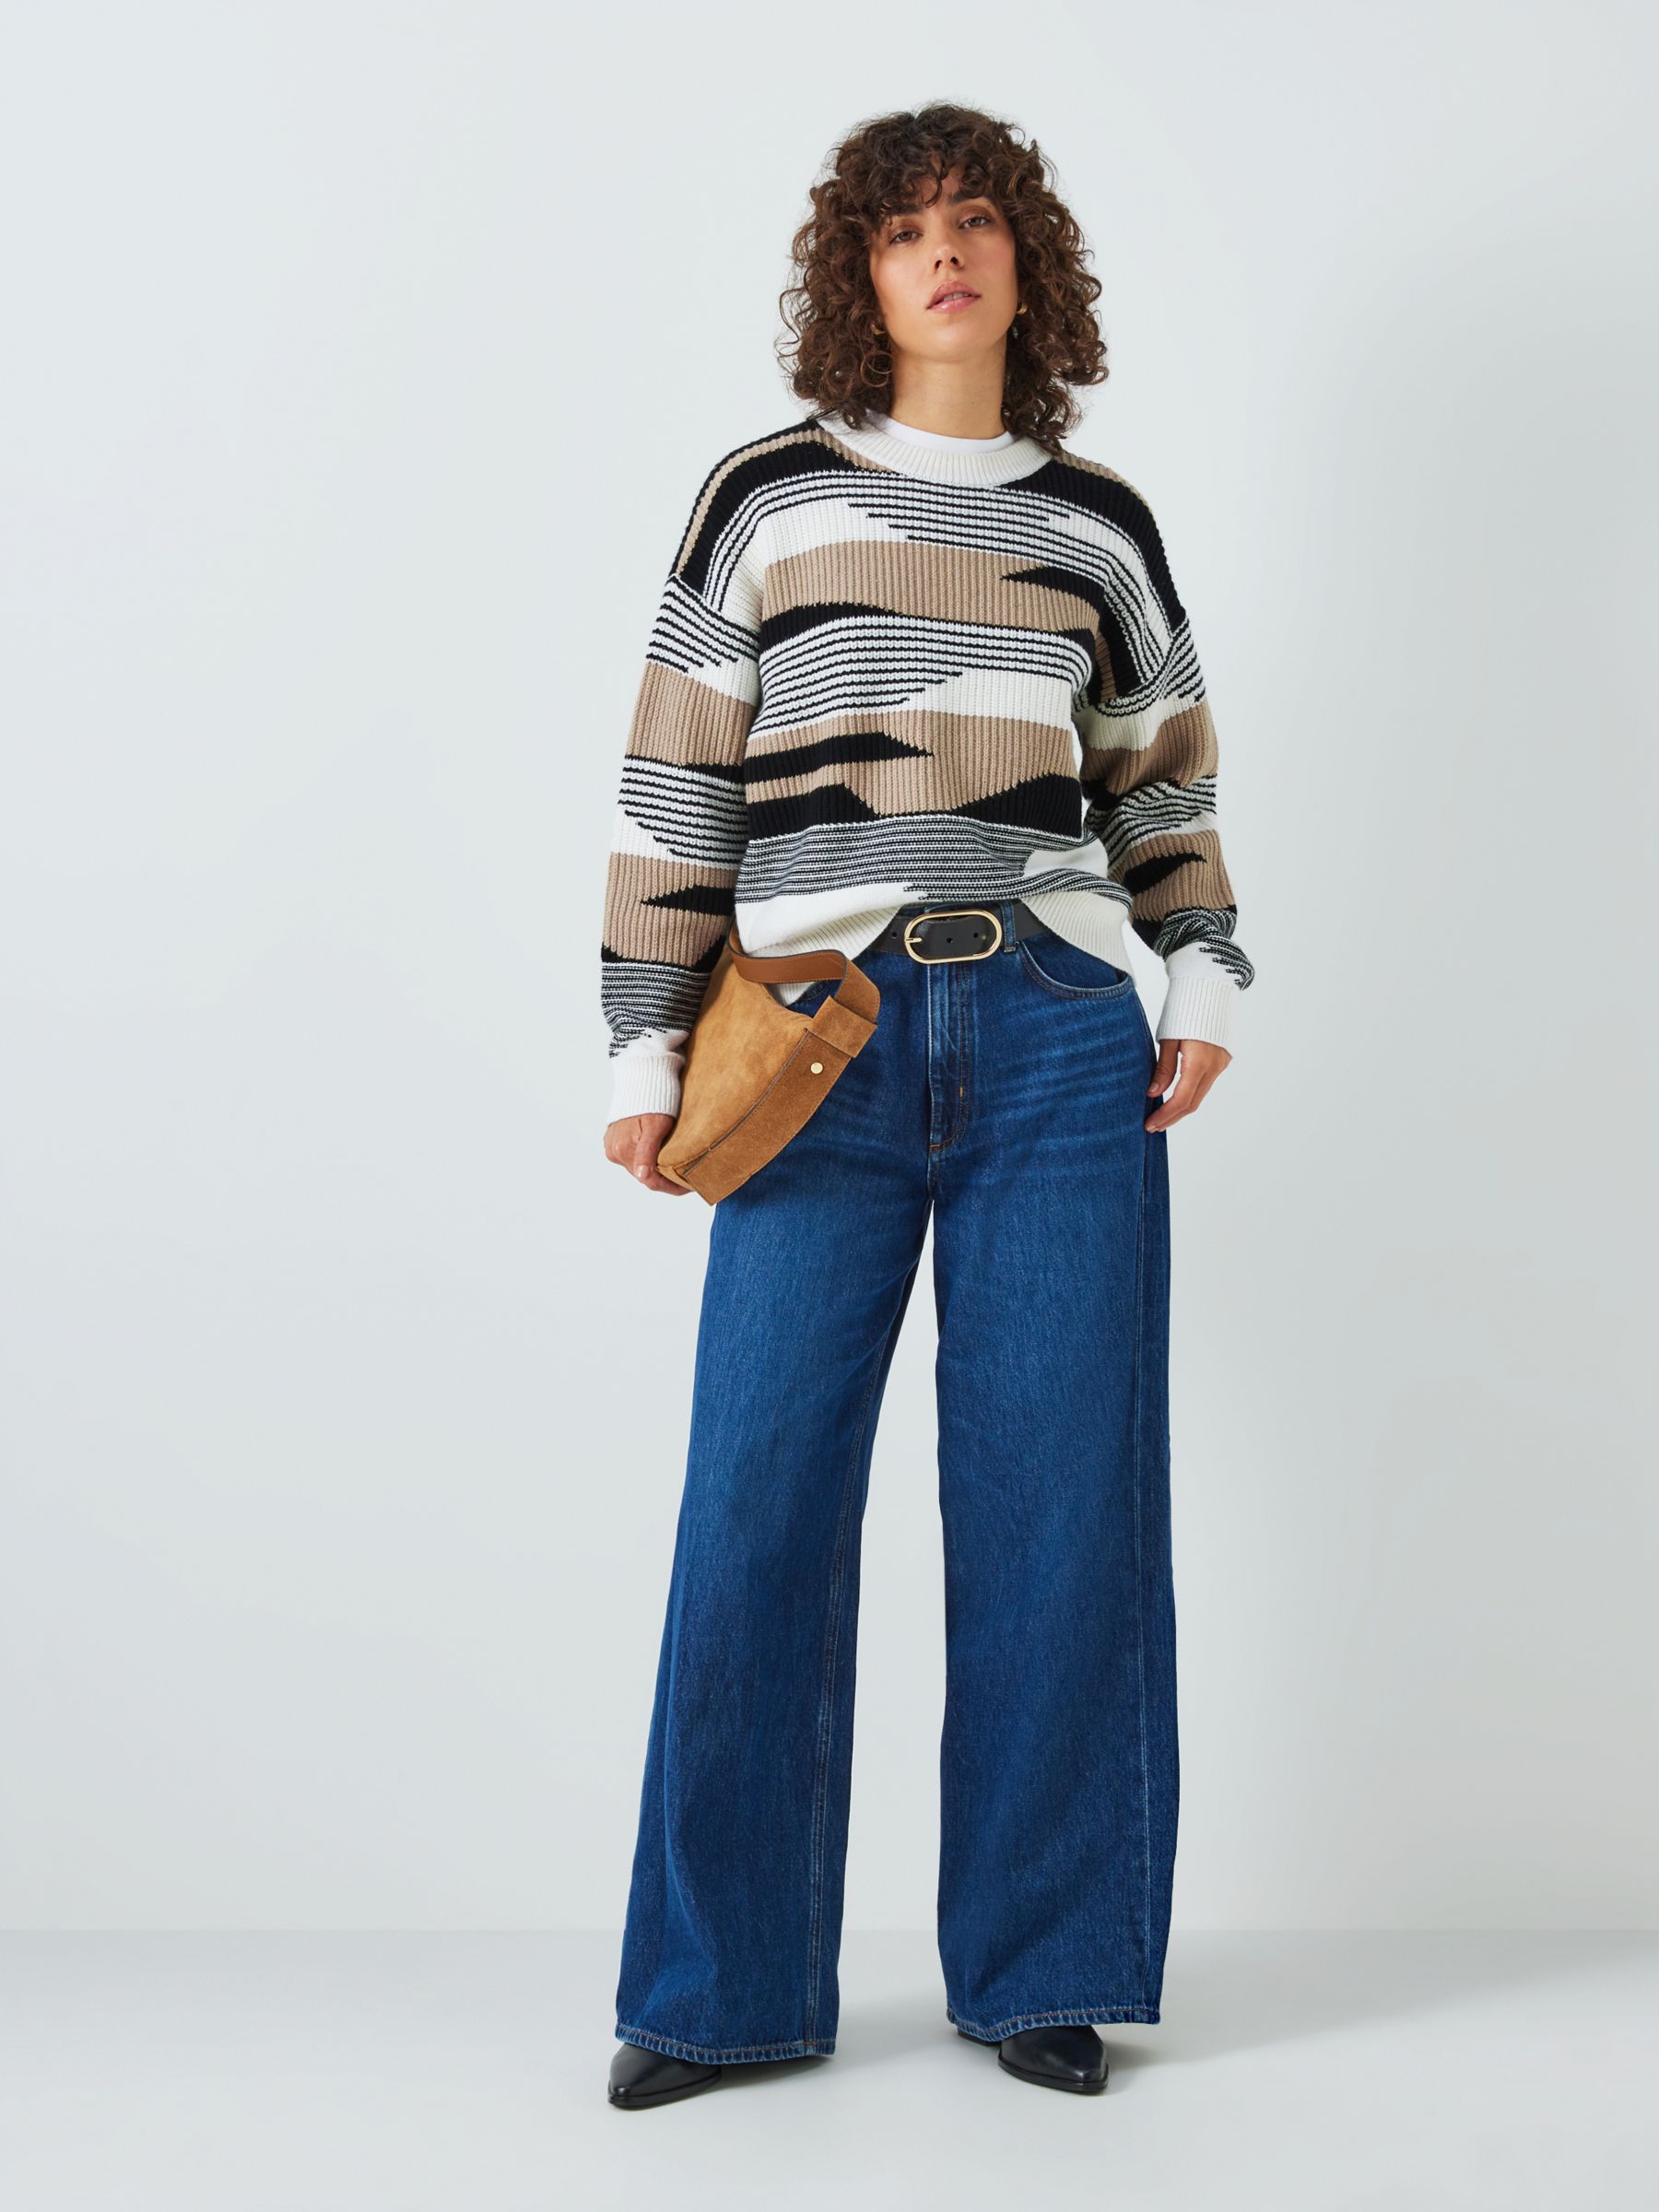 Buy AND/OR Bonnie Abstract Stripe Wool Blend Jumper, Cream/Black Online at johnlewis.com